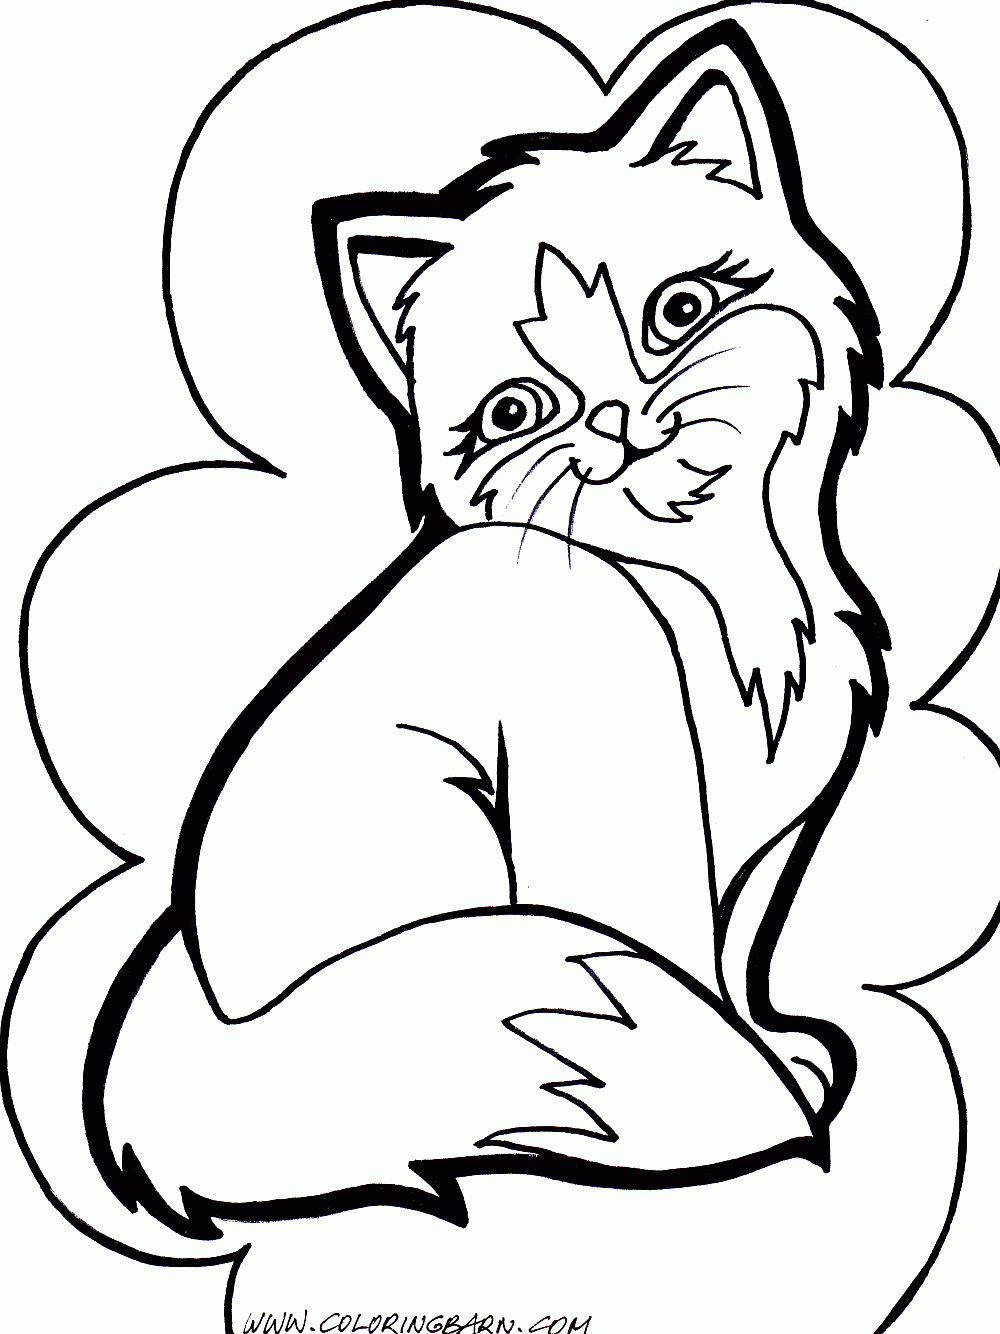 Cute Cat Coloring Pages To Print Coloring Home